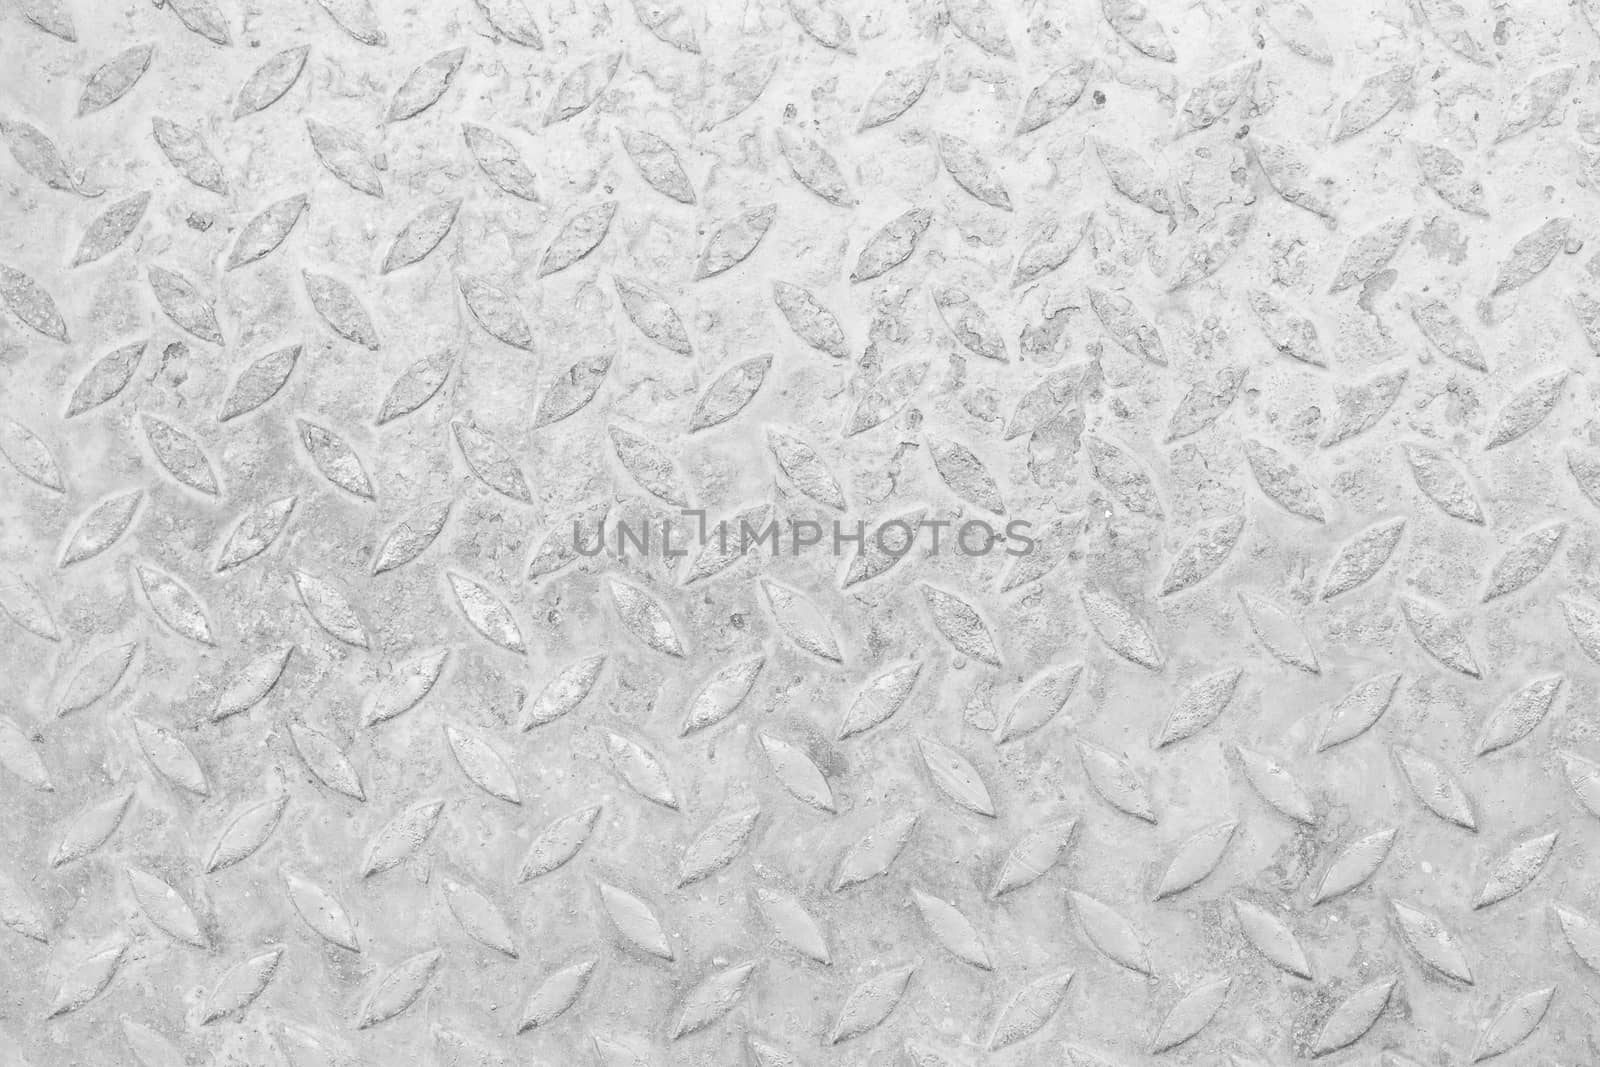 White background texture of grunged metal pattern by Suriyaphoto